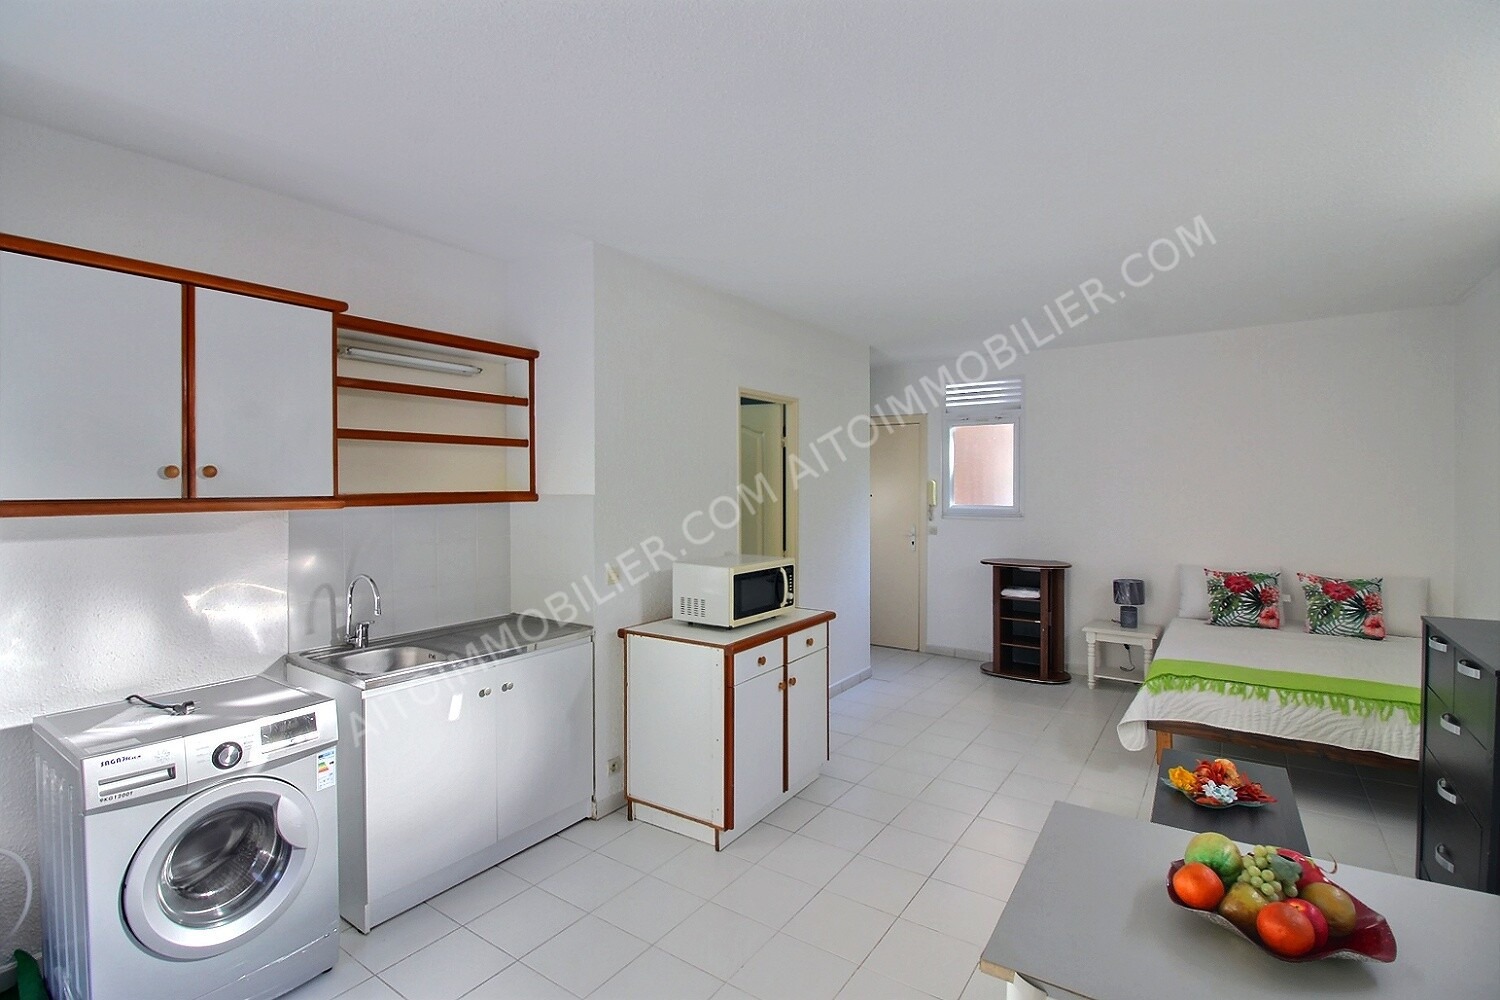 LOCATION APPARTEMENT  PUNAAUIA F1 3